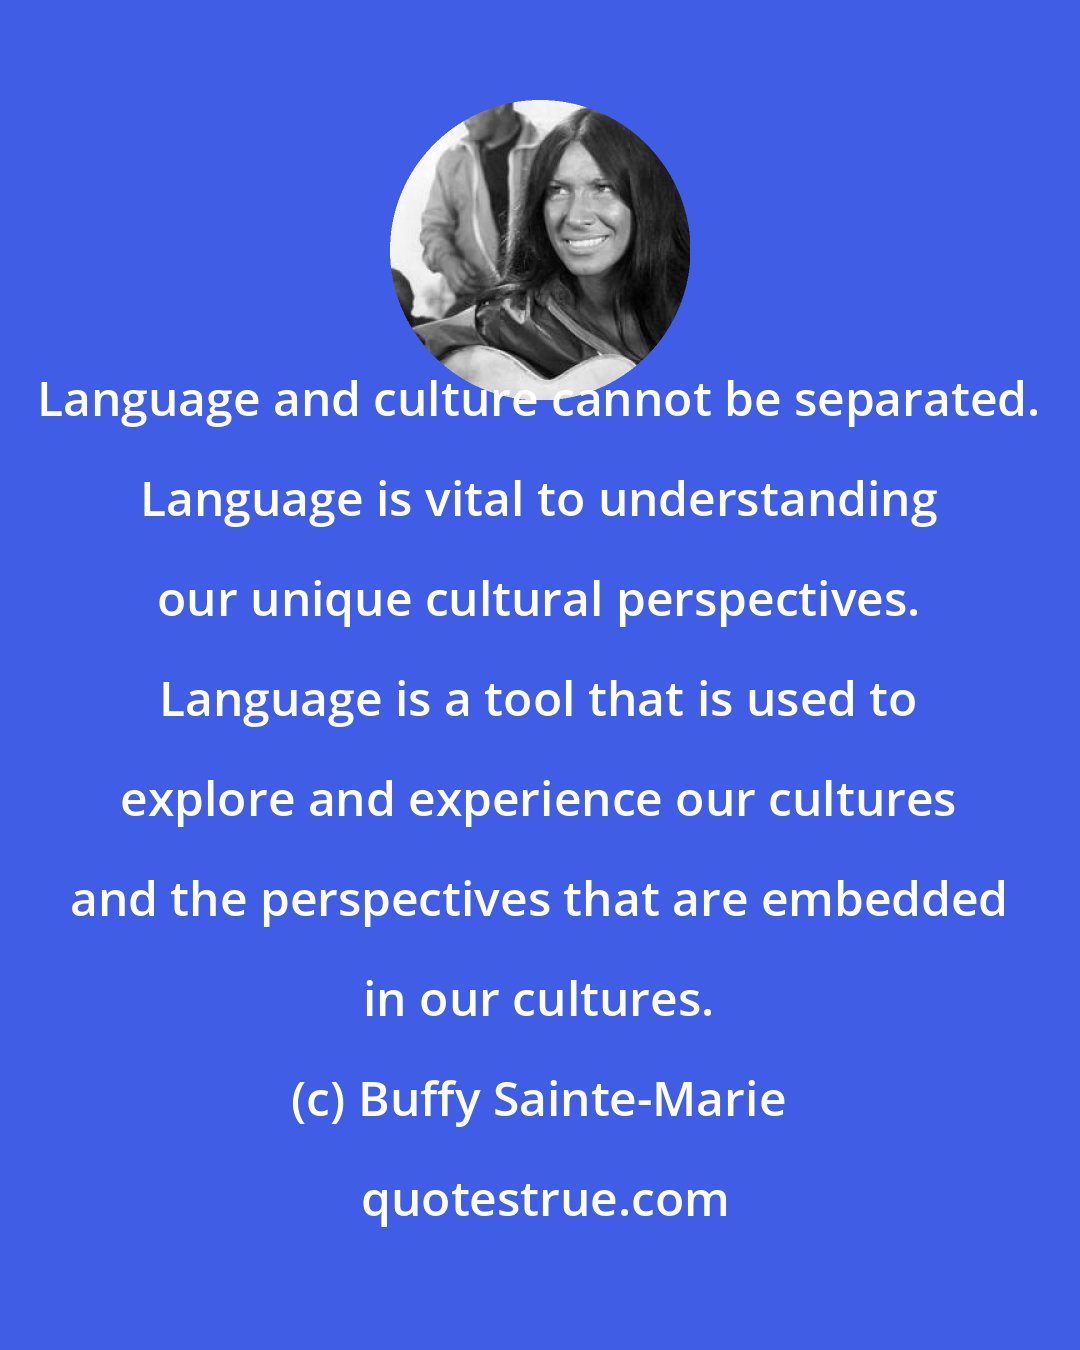 Buffy Sainte-Marie: Language and culture cannot be separated. Language is vital to understanding our unique cultural perspectives. Language is a tool that is used to explore and experience our cultures and the perspectives that are embedded in our cultures.